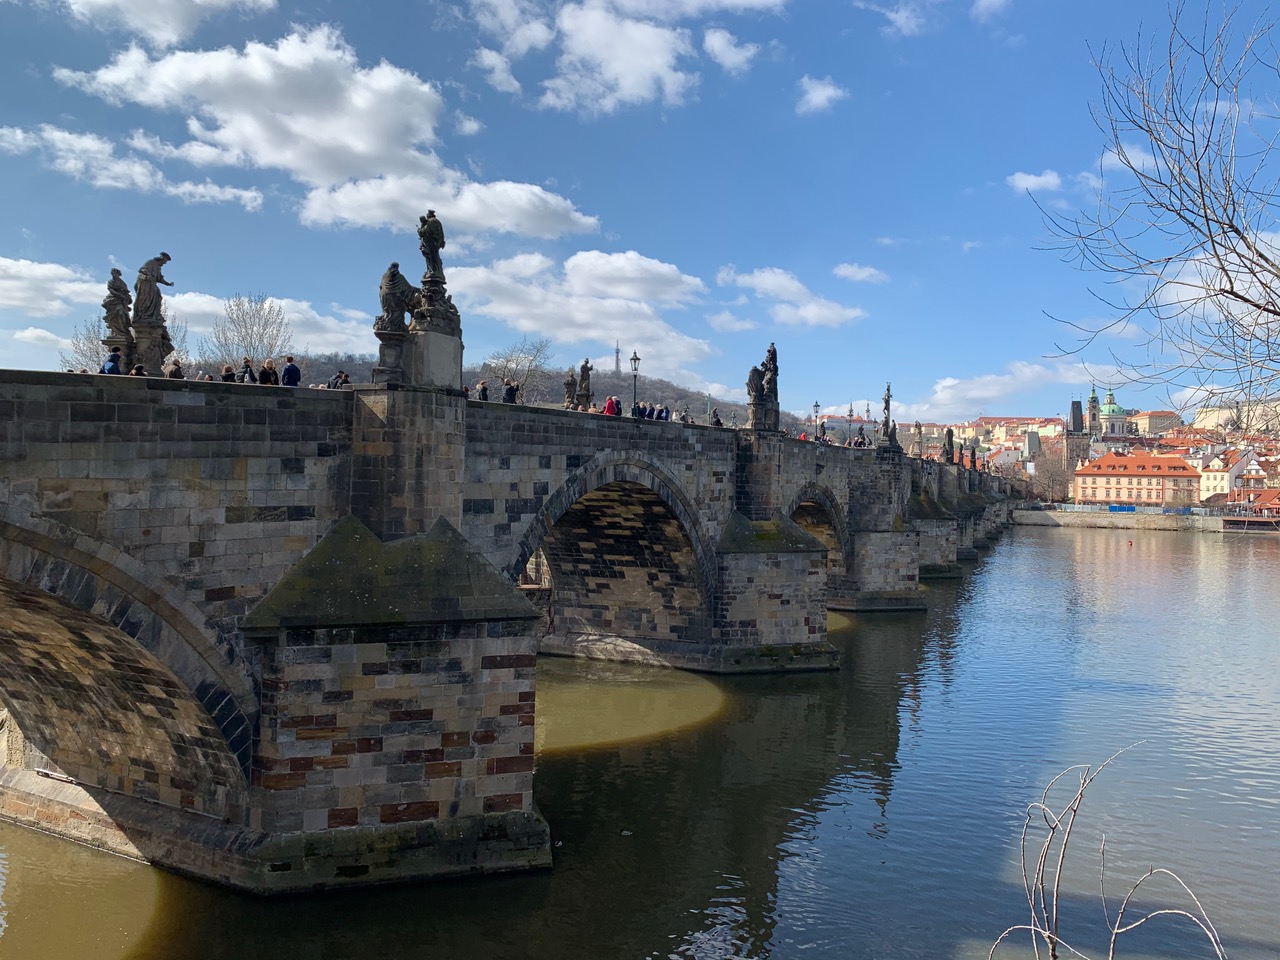 Charles Bridge stretching in arches across the river